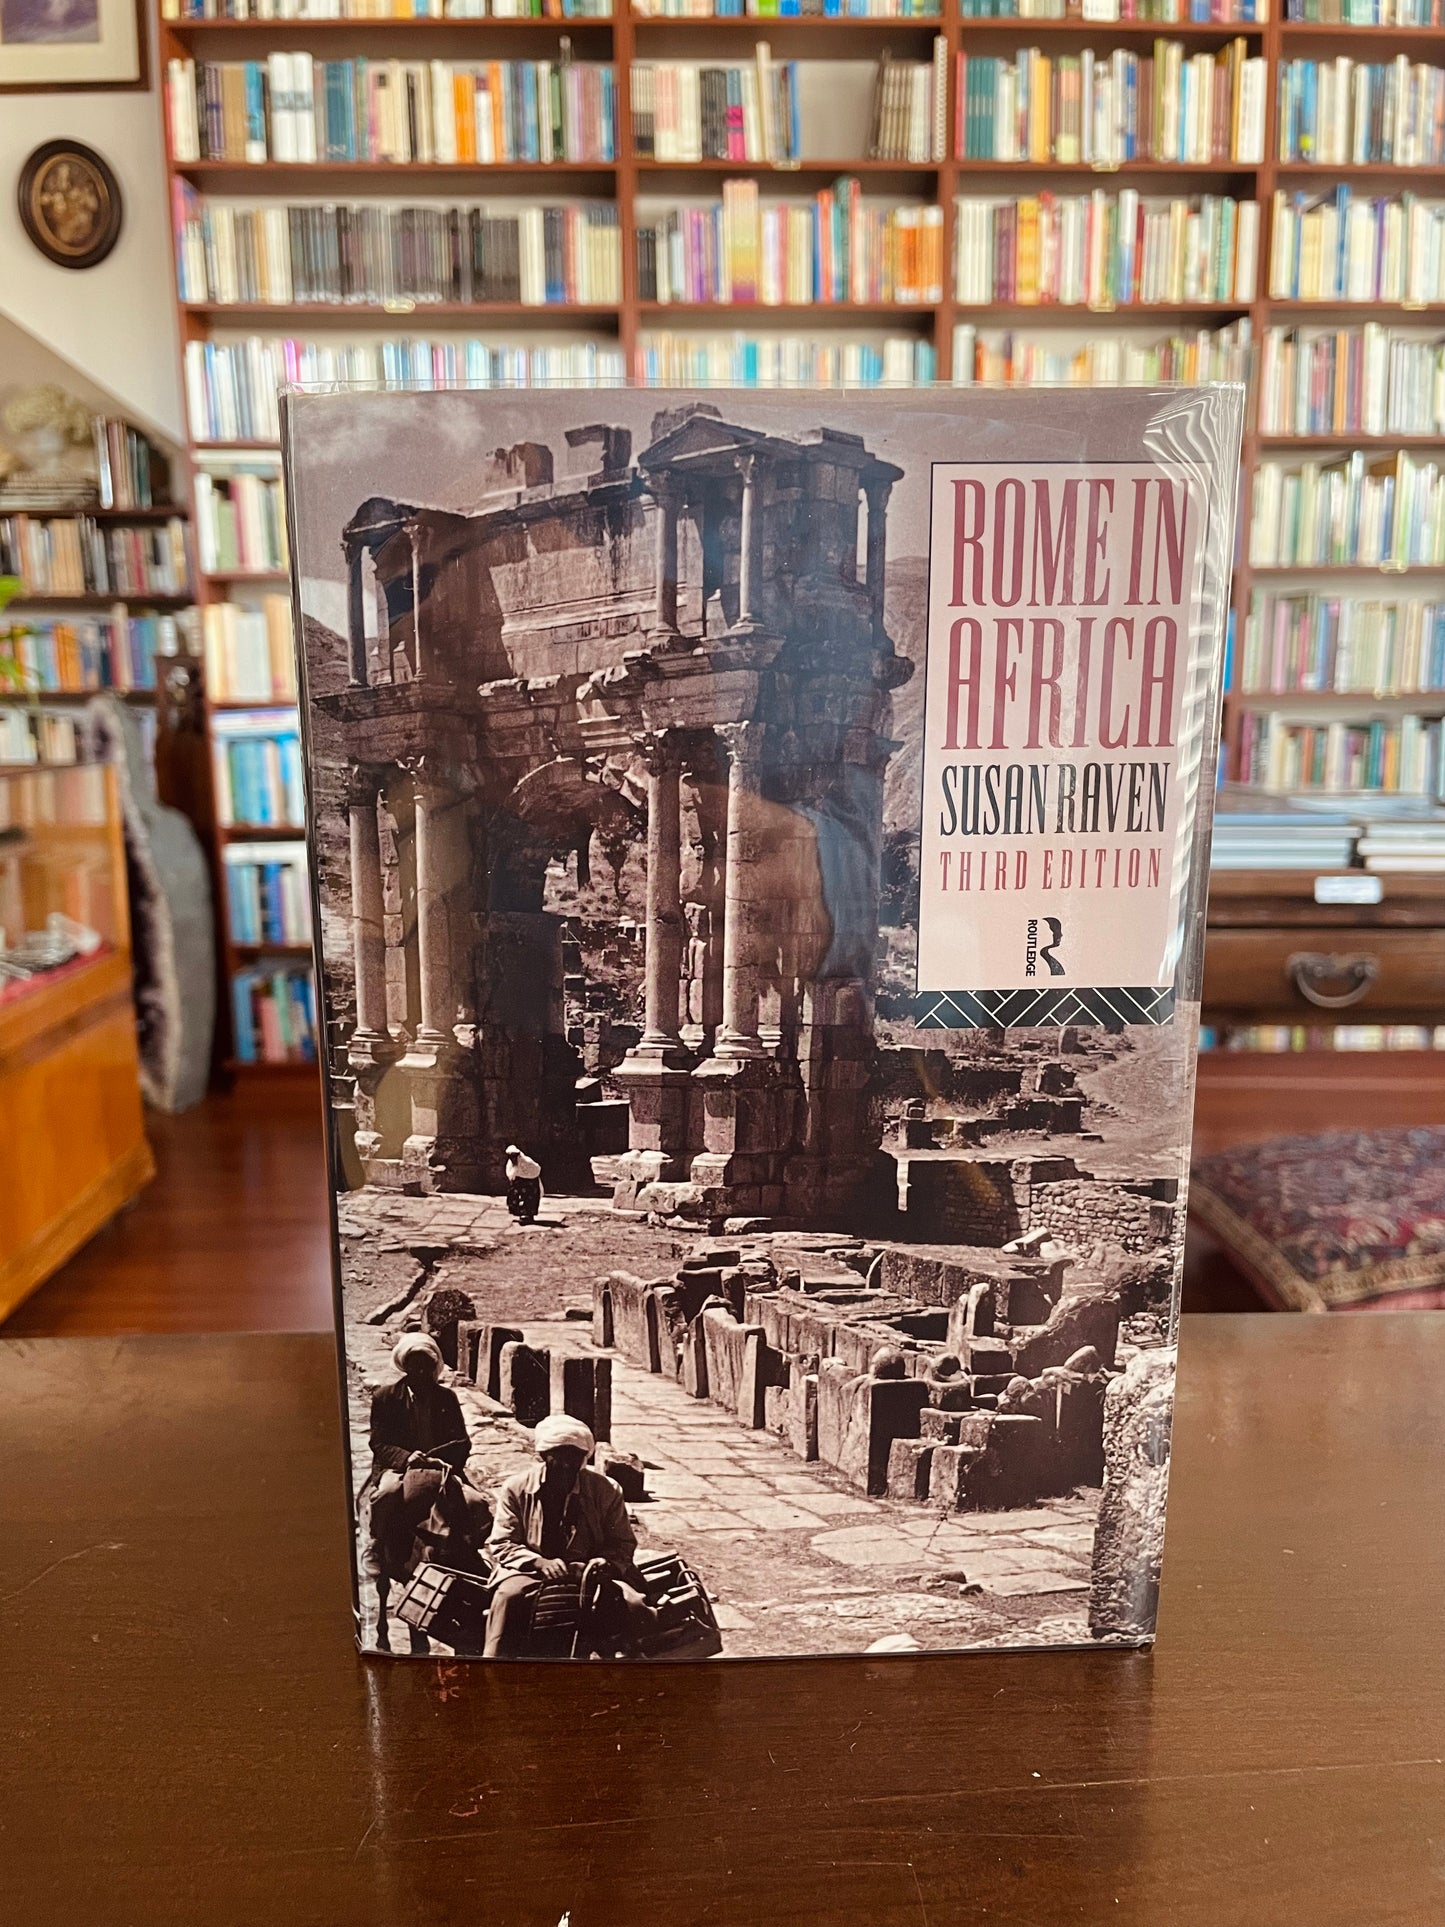 Rome in Africa by Susan Raven